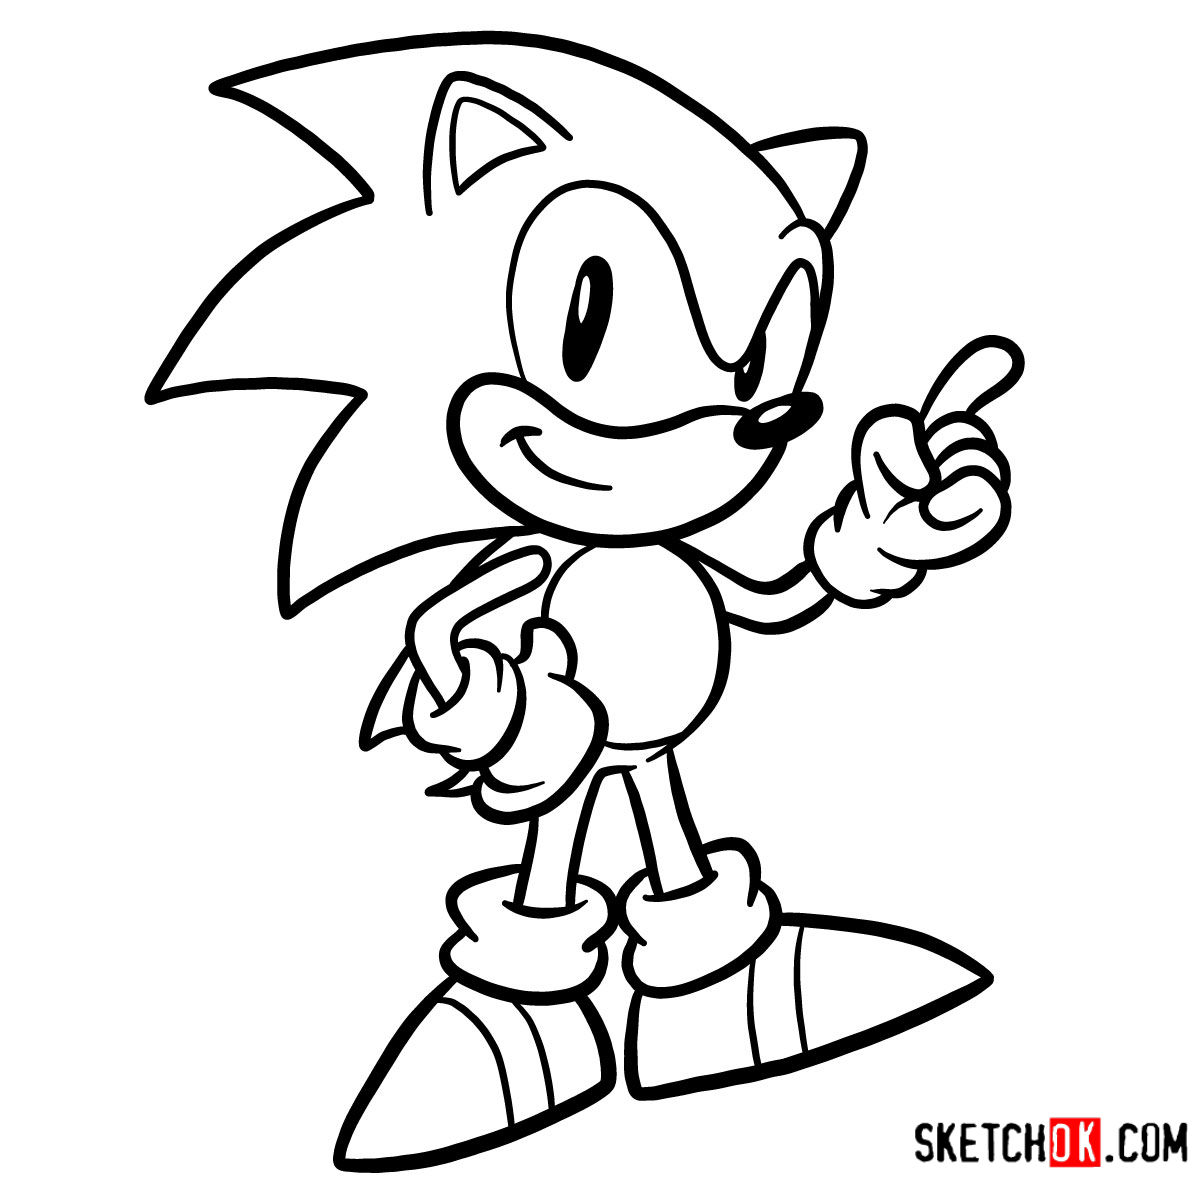 How to draw Sonic the Hedgehog SEGA games style